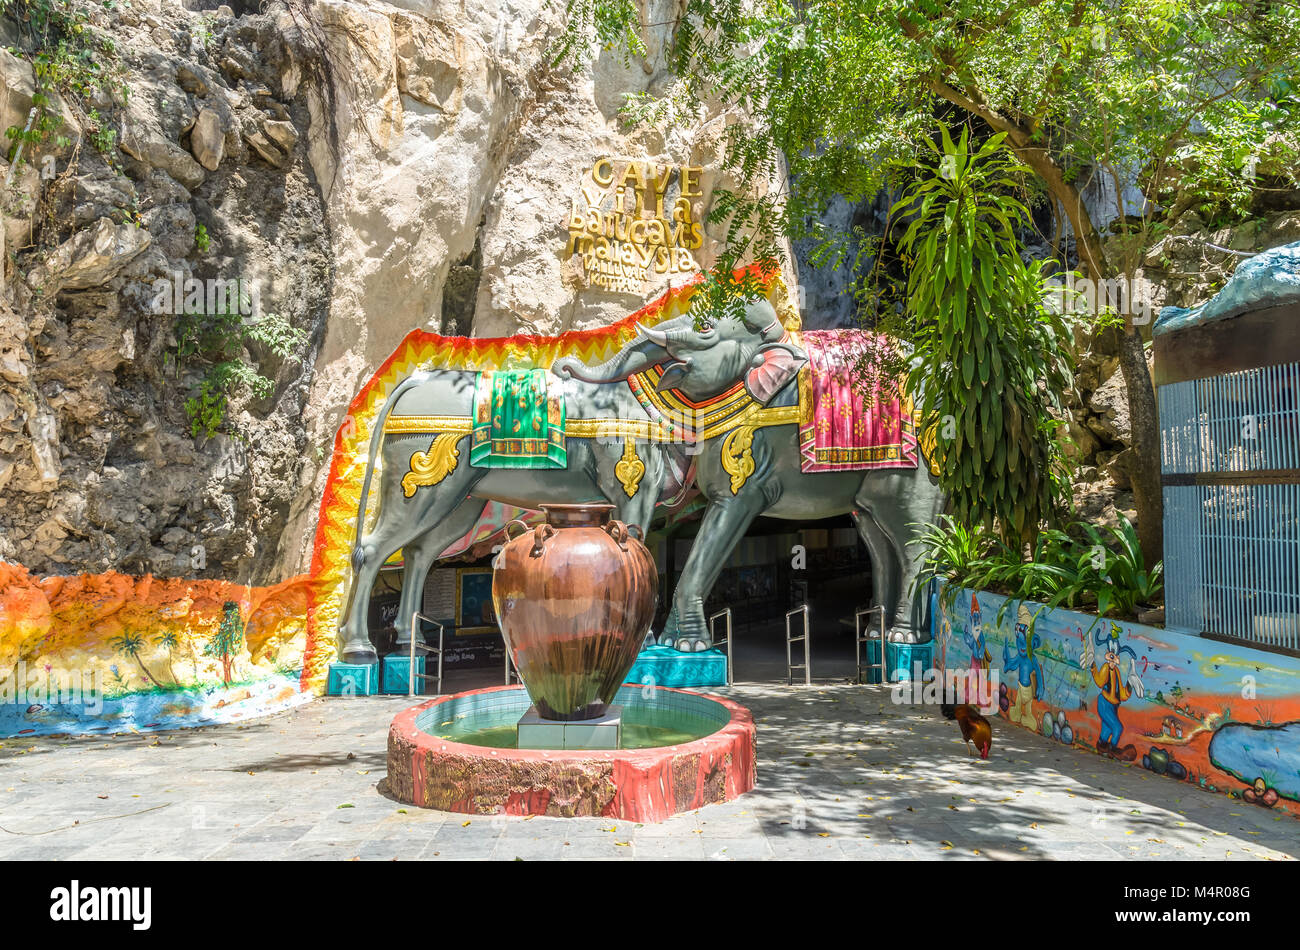 Kuala Lumpur, Malaysia - Feb 13, 2018 : CAVE Villa is a new tourism attraction in Batu Caves. Indoor gallery with huge monuments and fantastic artwork. Stock Photo